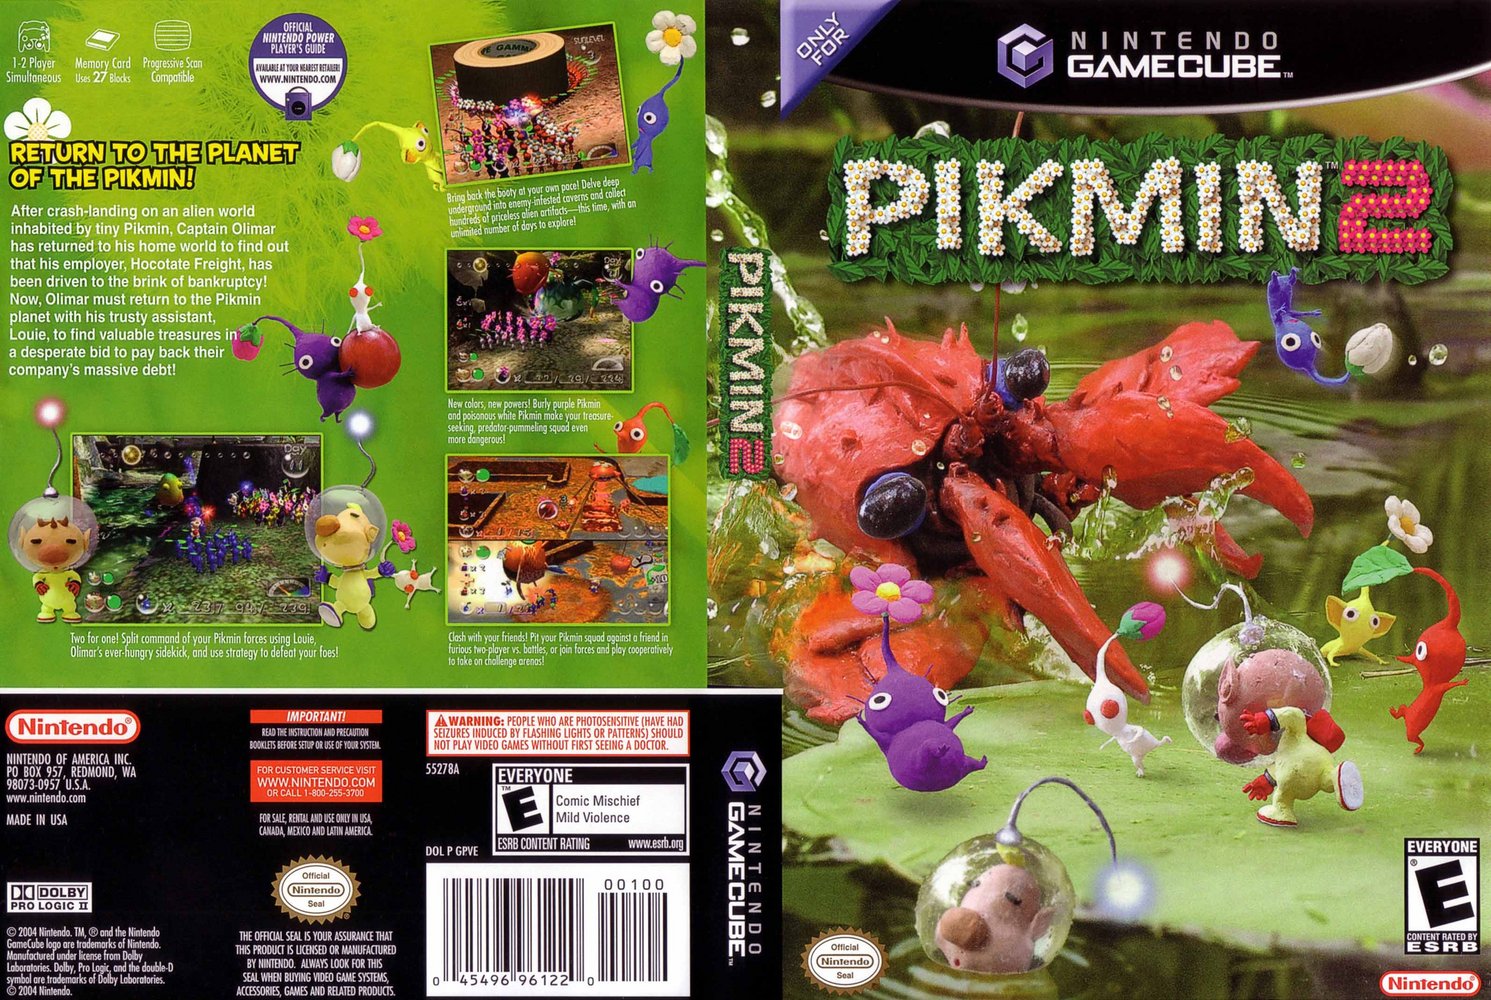 pikmin 2 iso wii